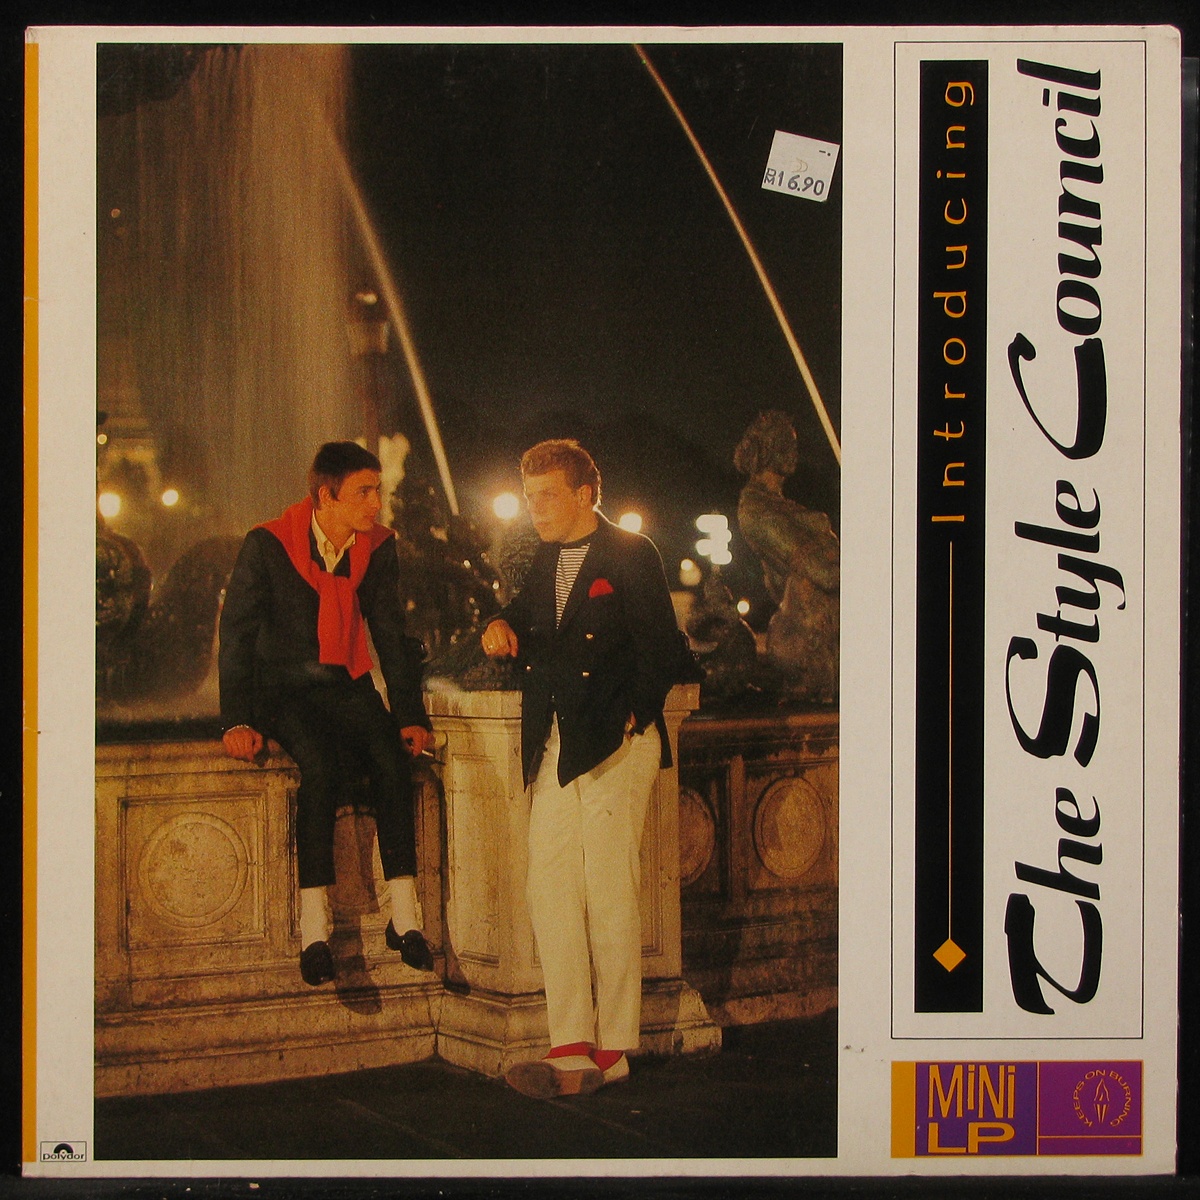 LP Style Council — Introducing фото